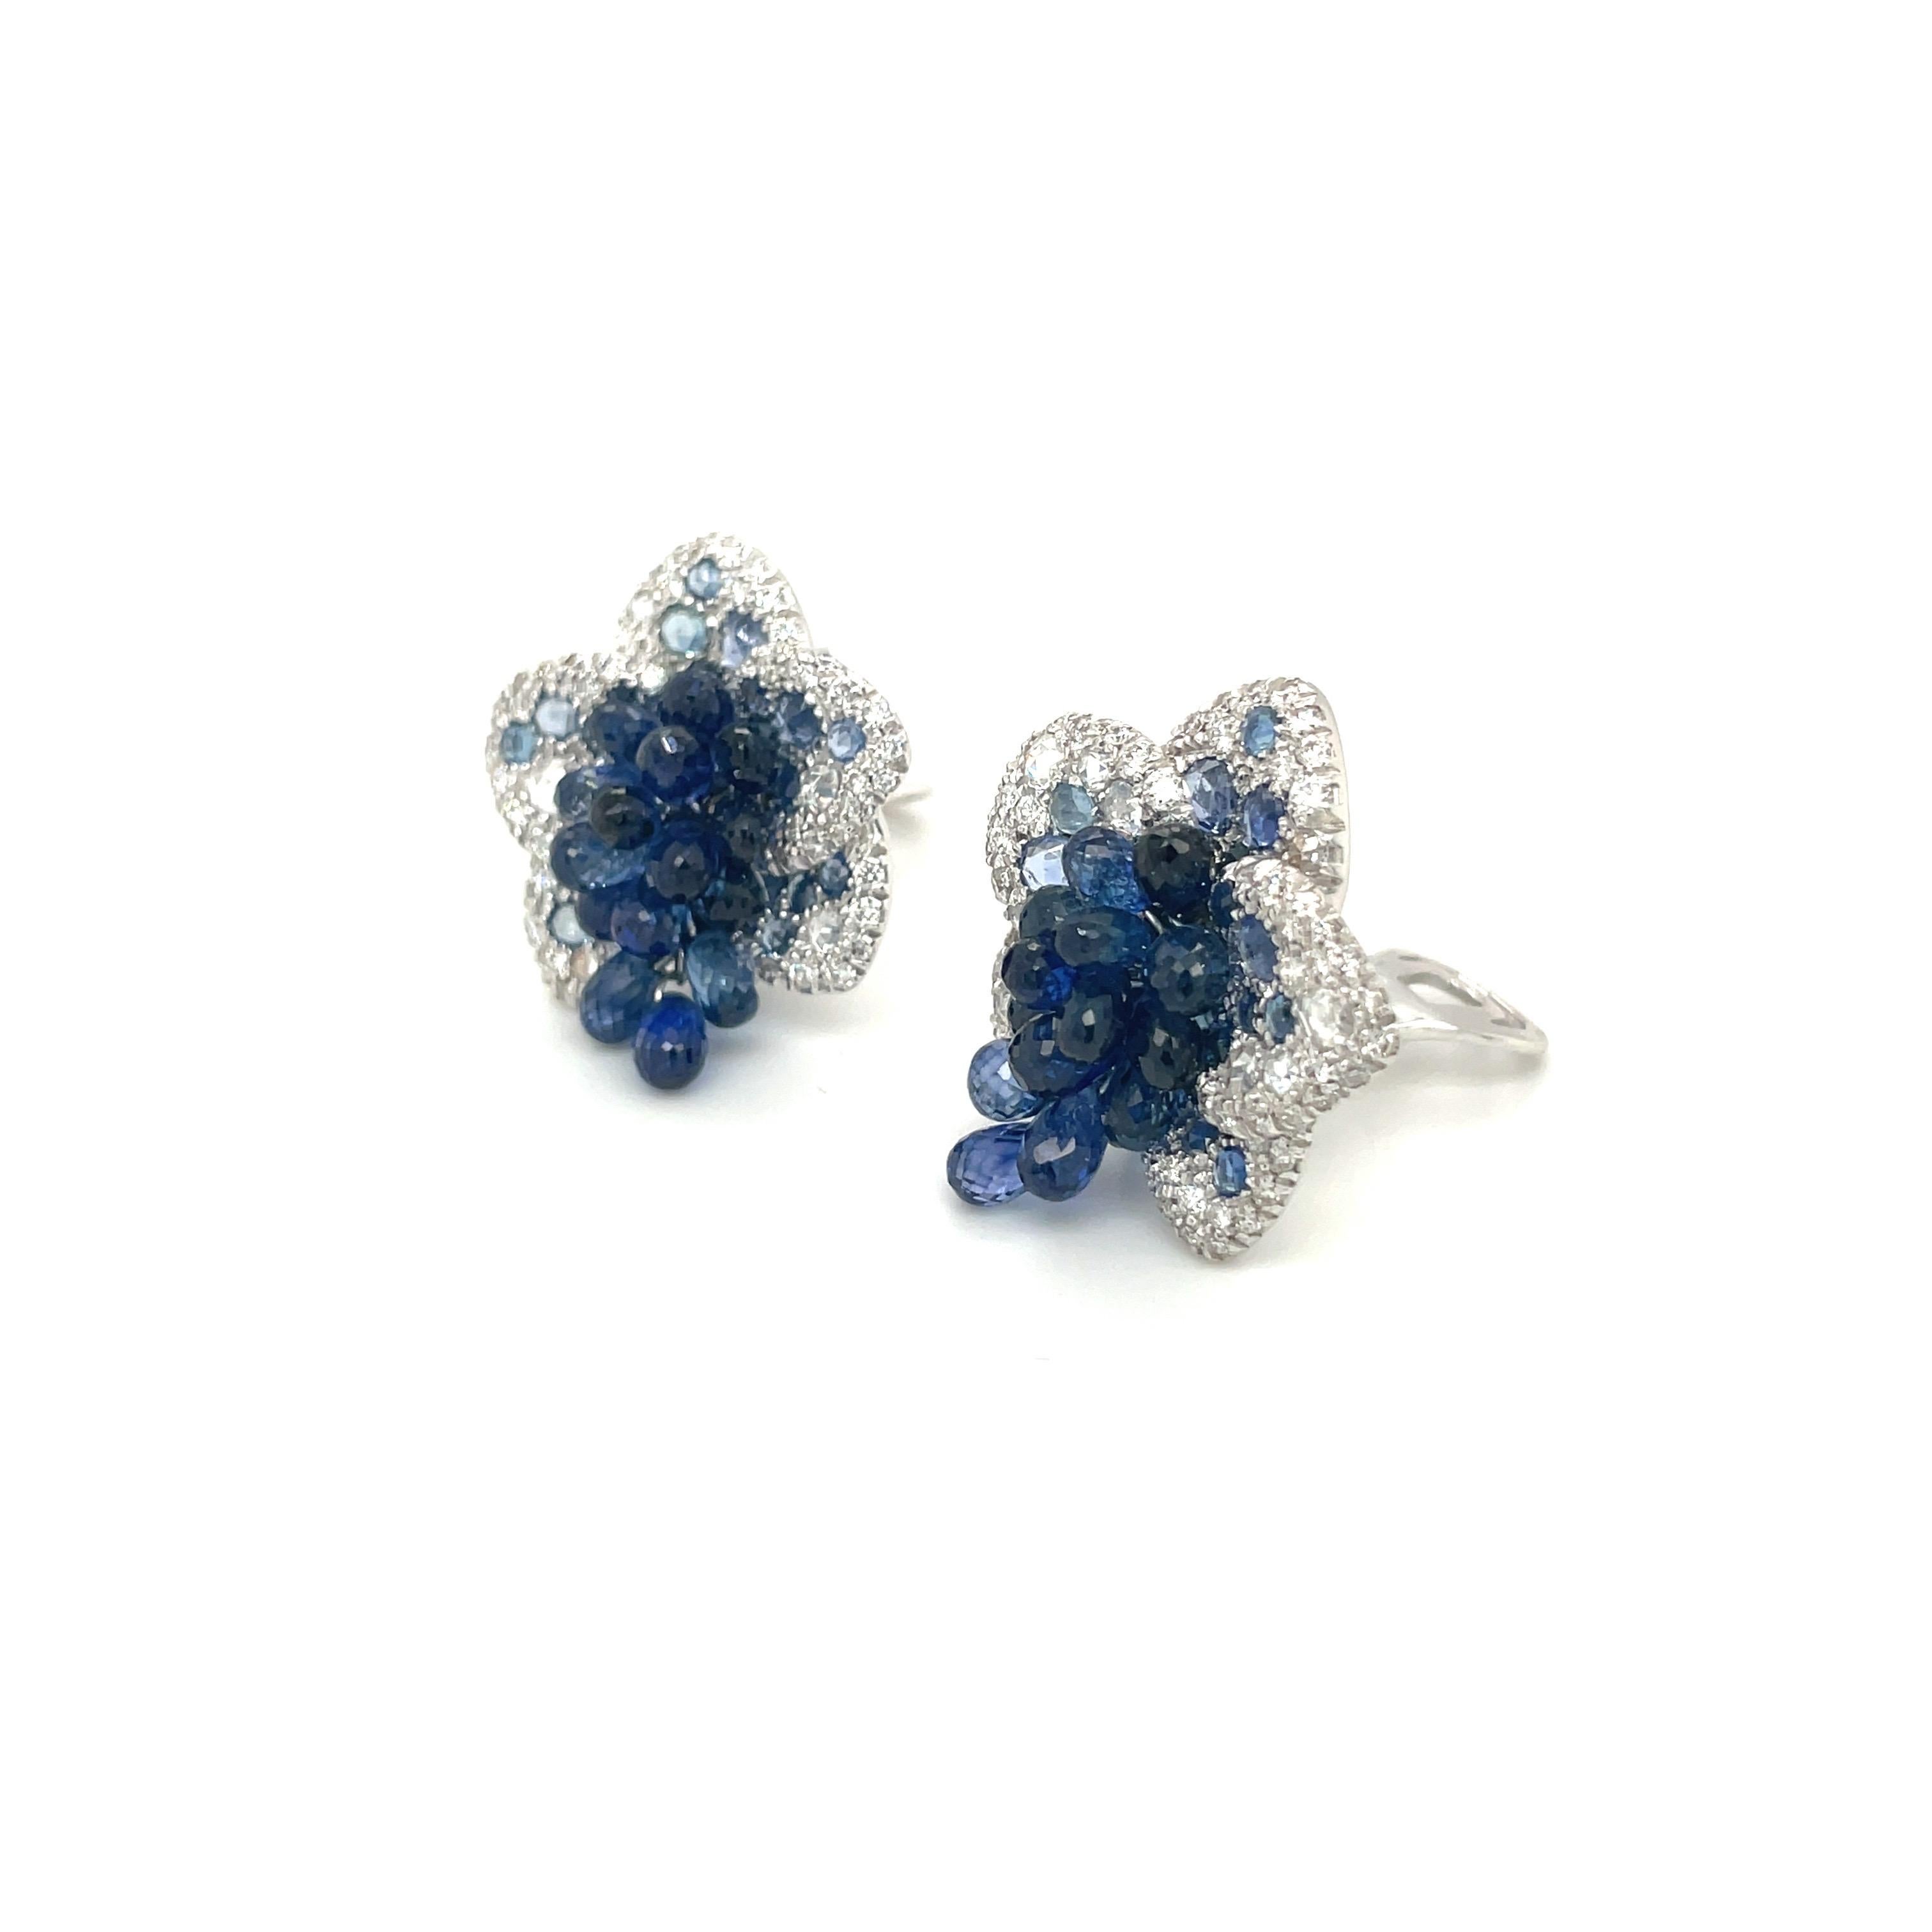 These uniquely stunning 18 karat white gold flower earrings are composed of 1.89 carats of round brilliant and rose-cut diamonds, and 16.72 carats of sapphire briolettes.
The briolette cut allows for the sapphires to dangle and move, allowing them